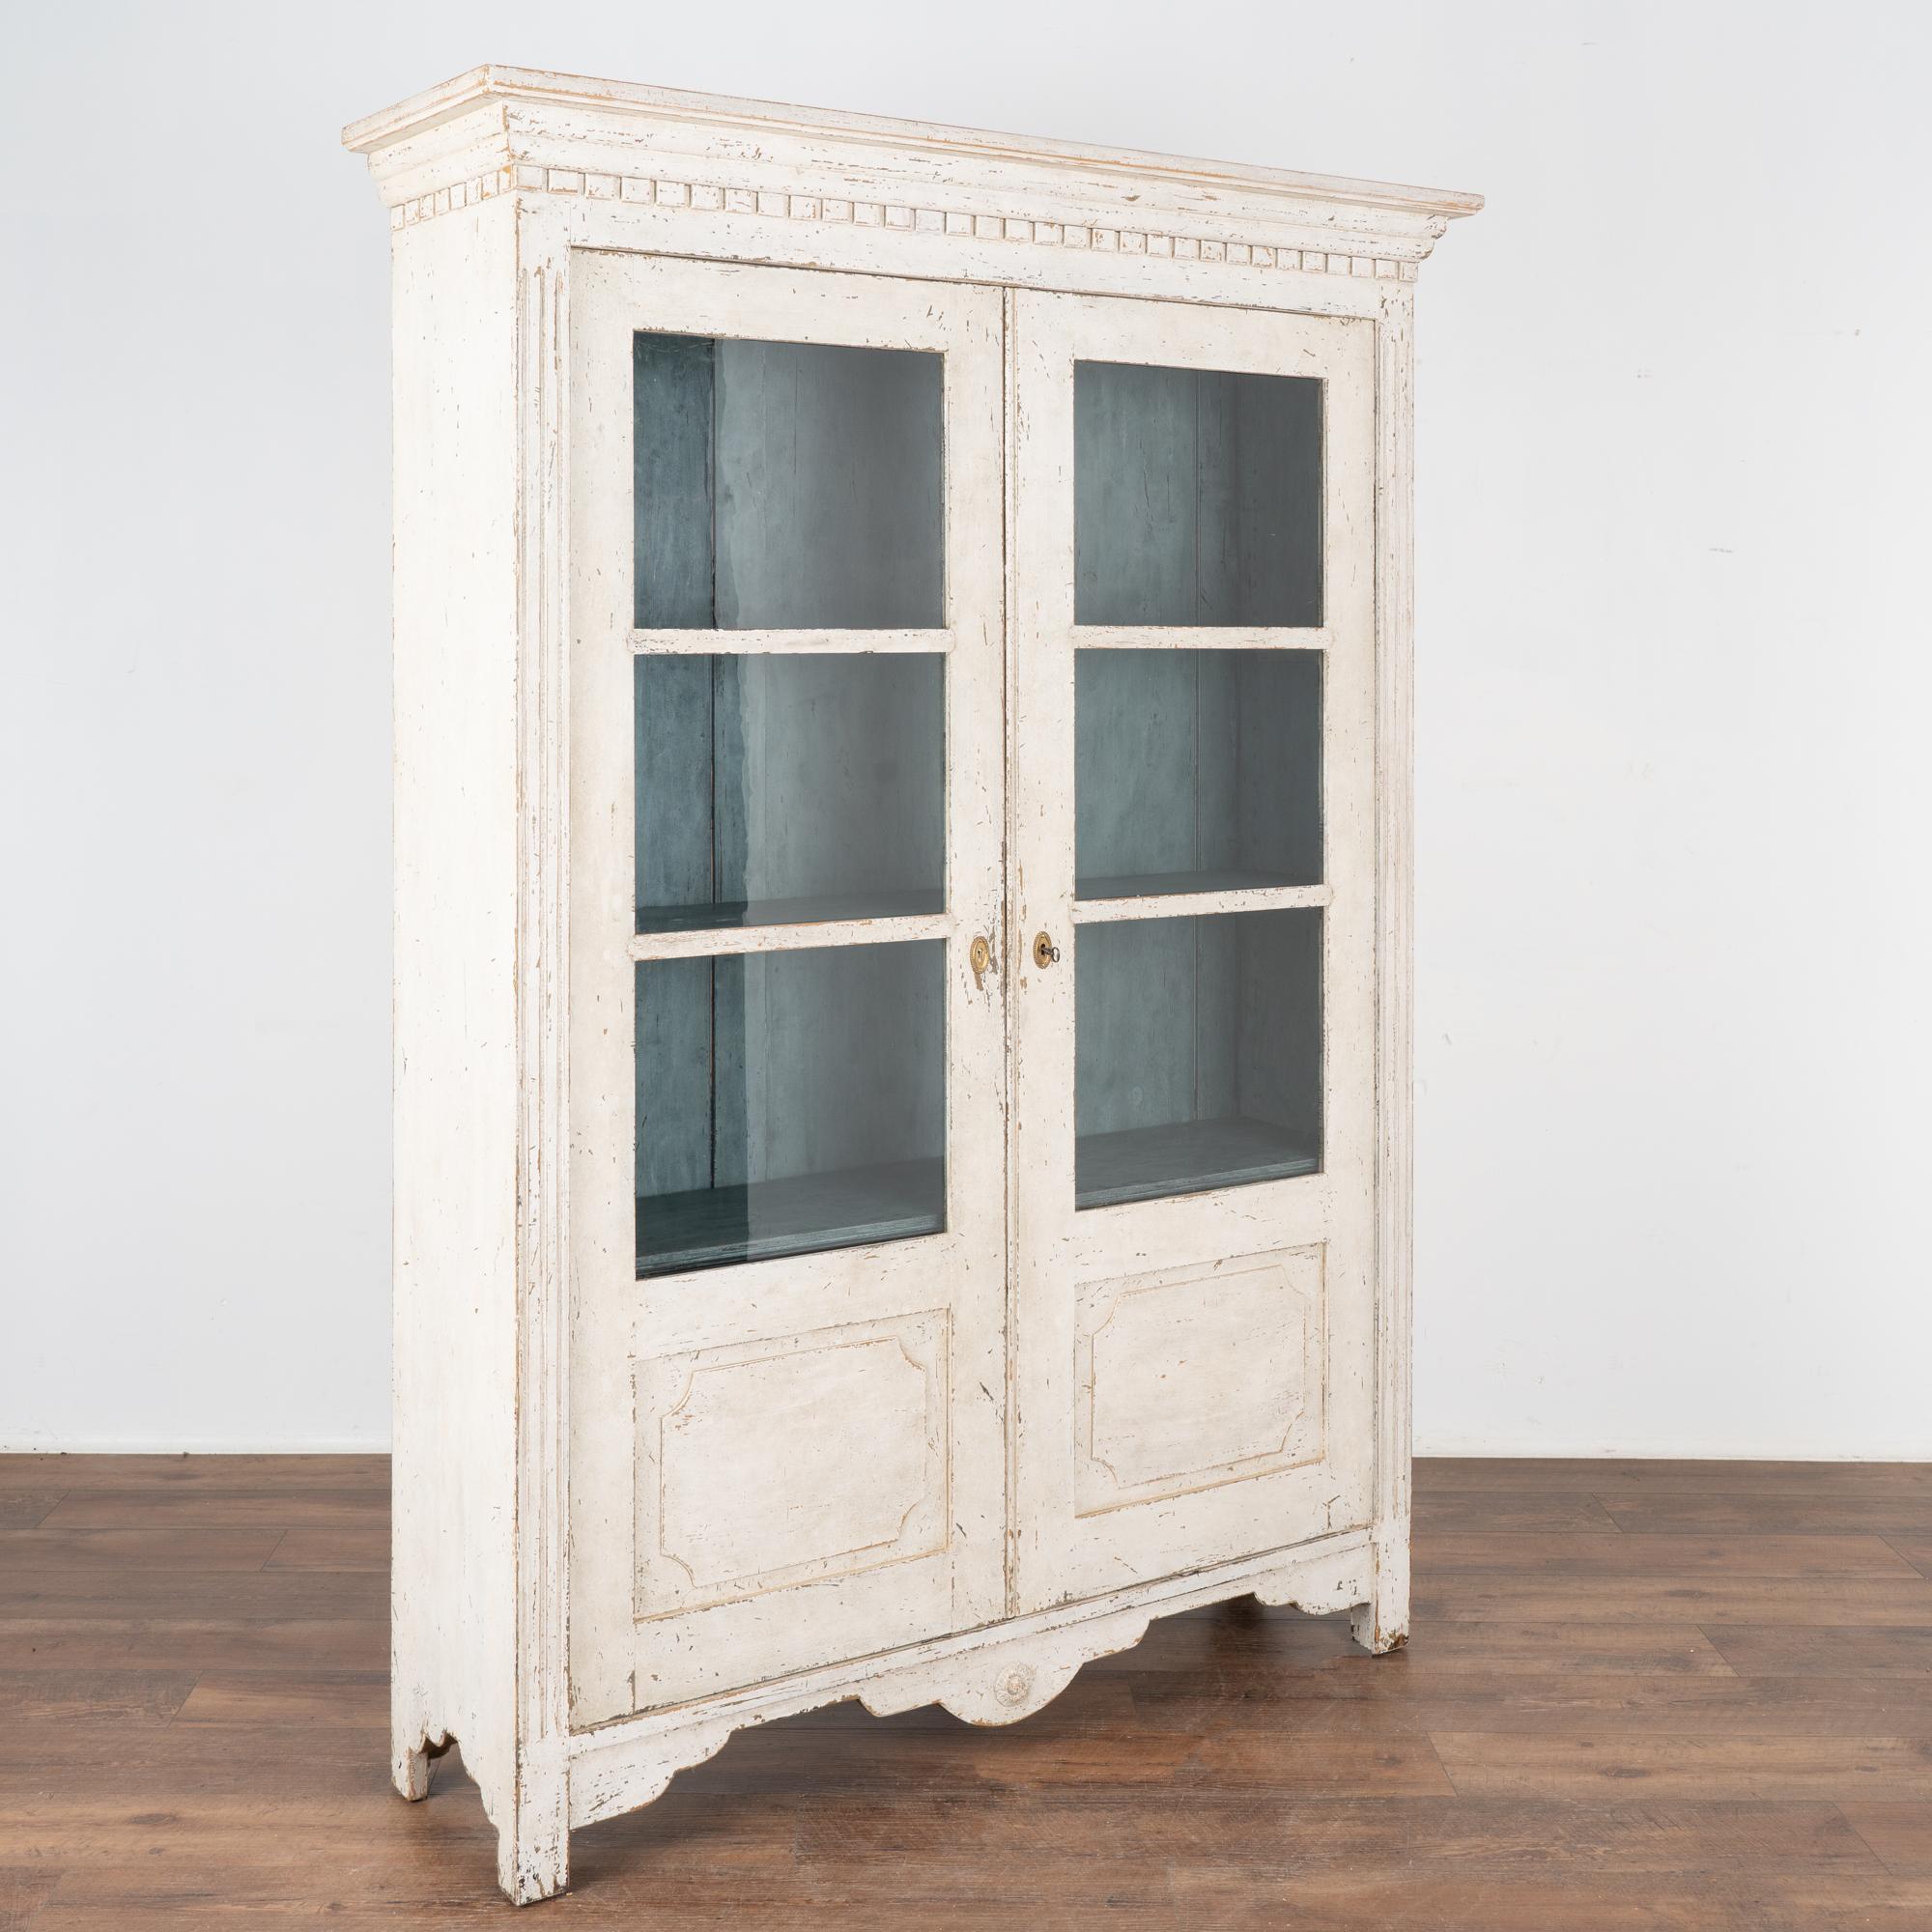 Delightful white painted pine bookcase with dentil molding along crown and fluted carved details along flanking sides. 
The simple lower panels and carved skirt add balance to this display cabinet.
Restored, later professionally painted in layered